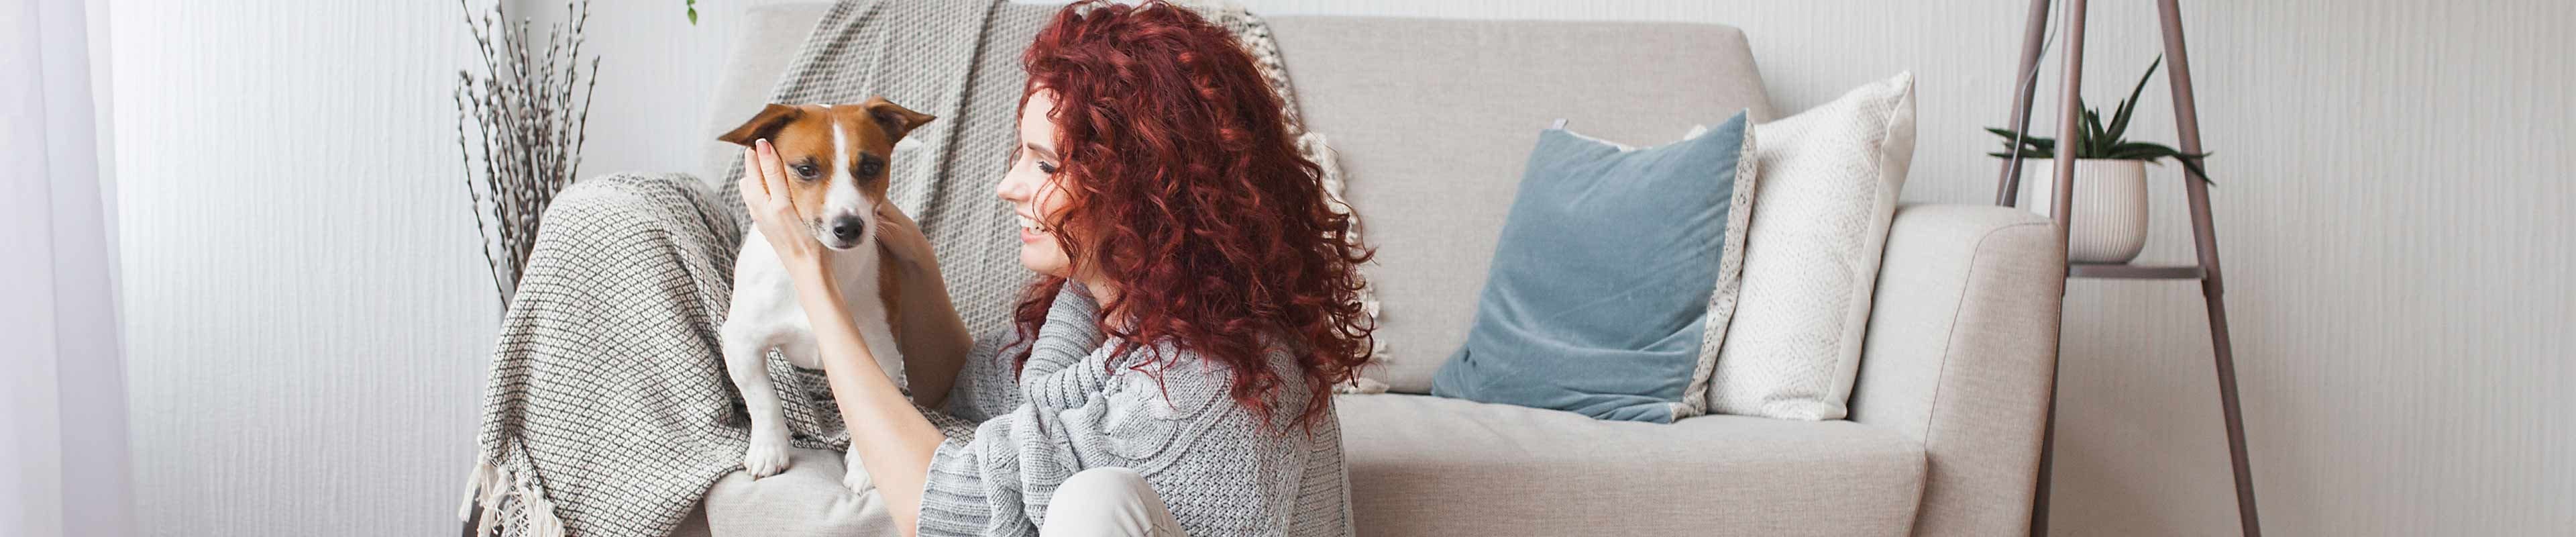 A red-haired white woman cuddles a small terrier breed dog that is sitting on a beige couch in a Scandinavian-style minimalist apartment.